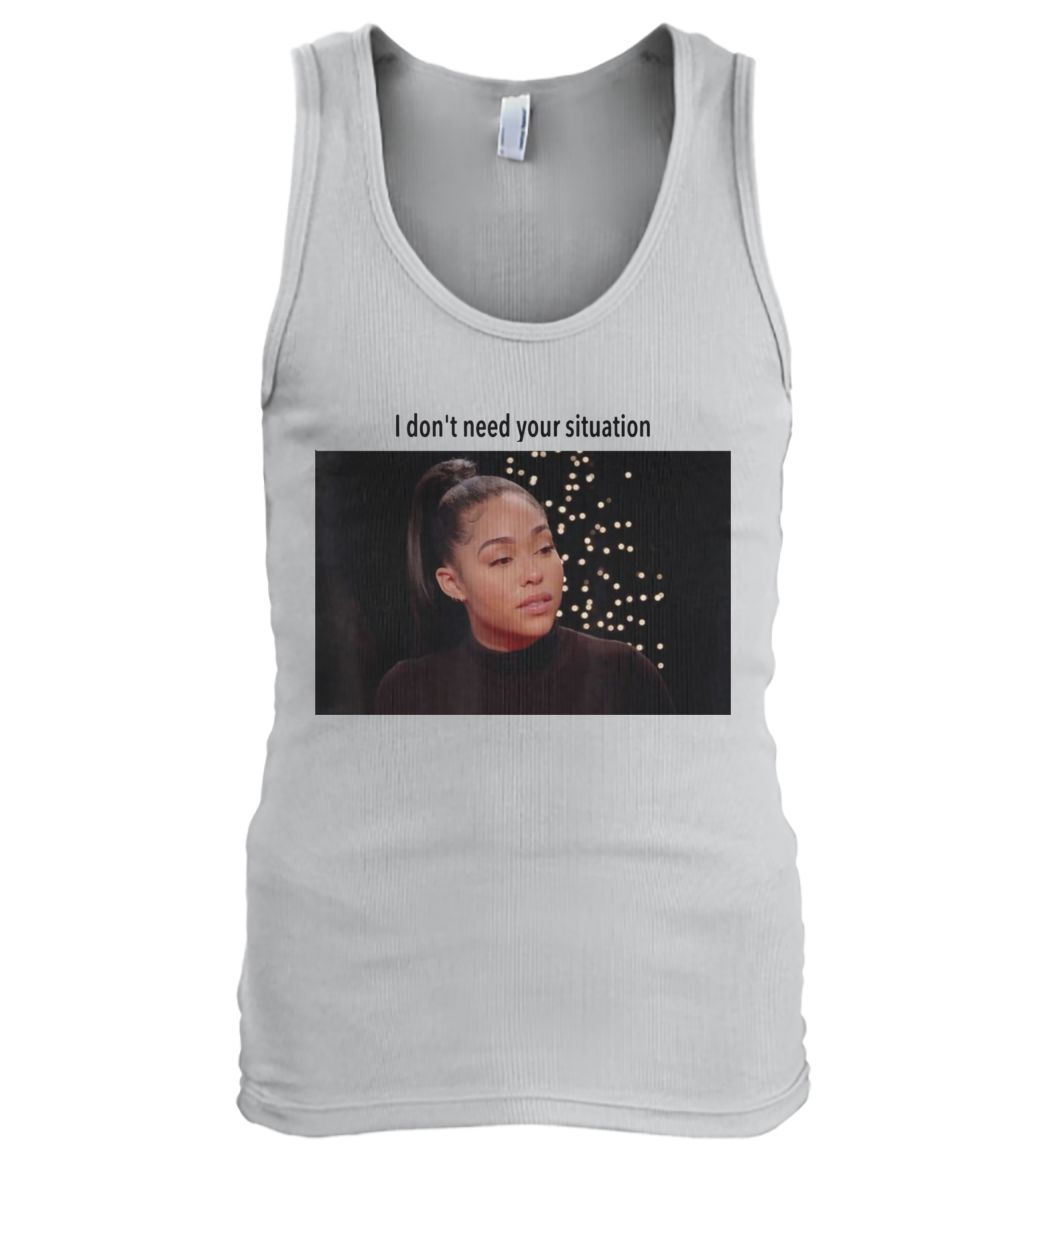 Jordyn woods I don't need your situation men's tank top